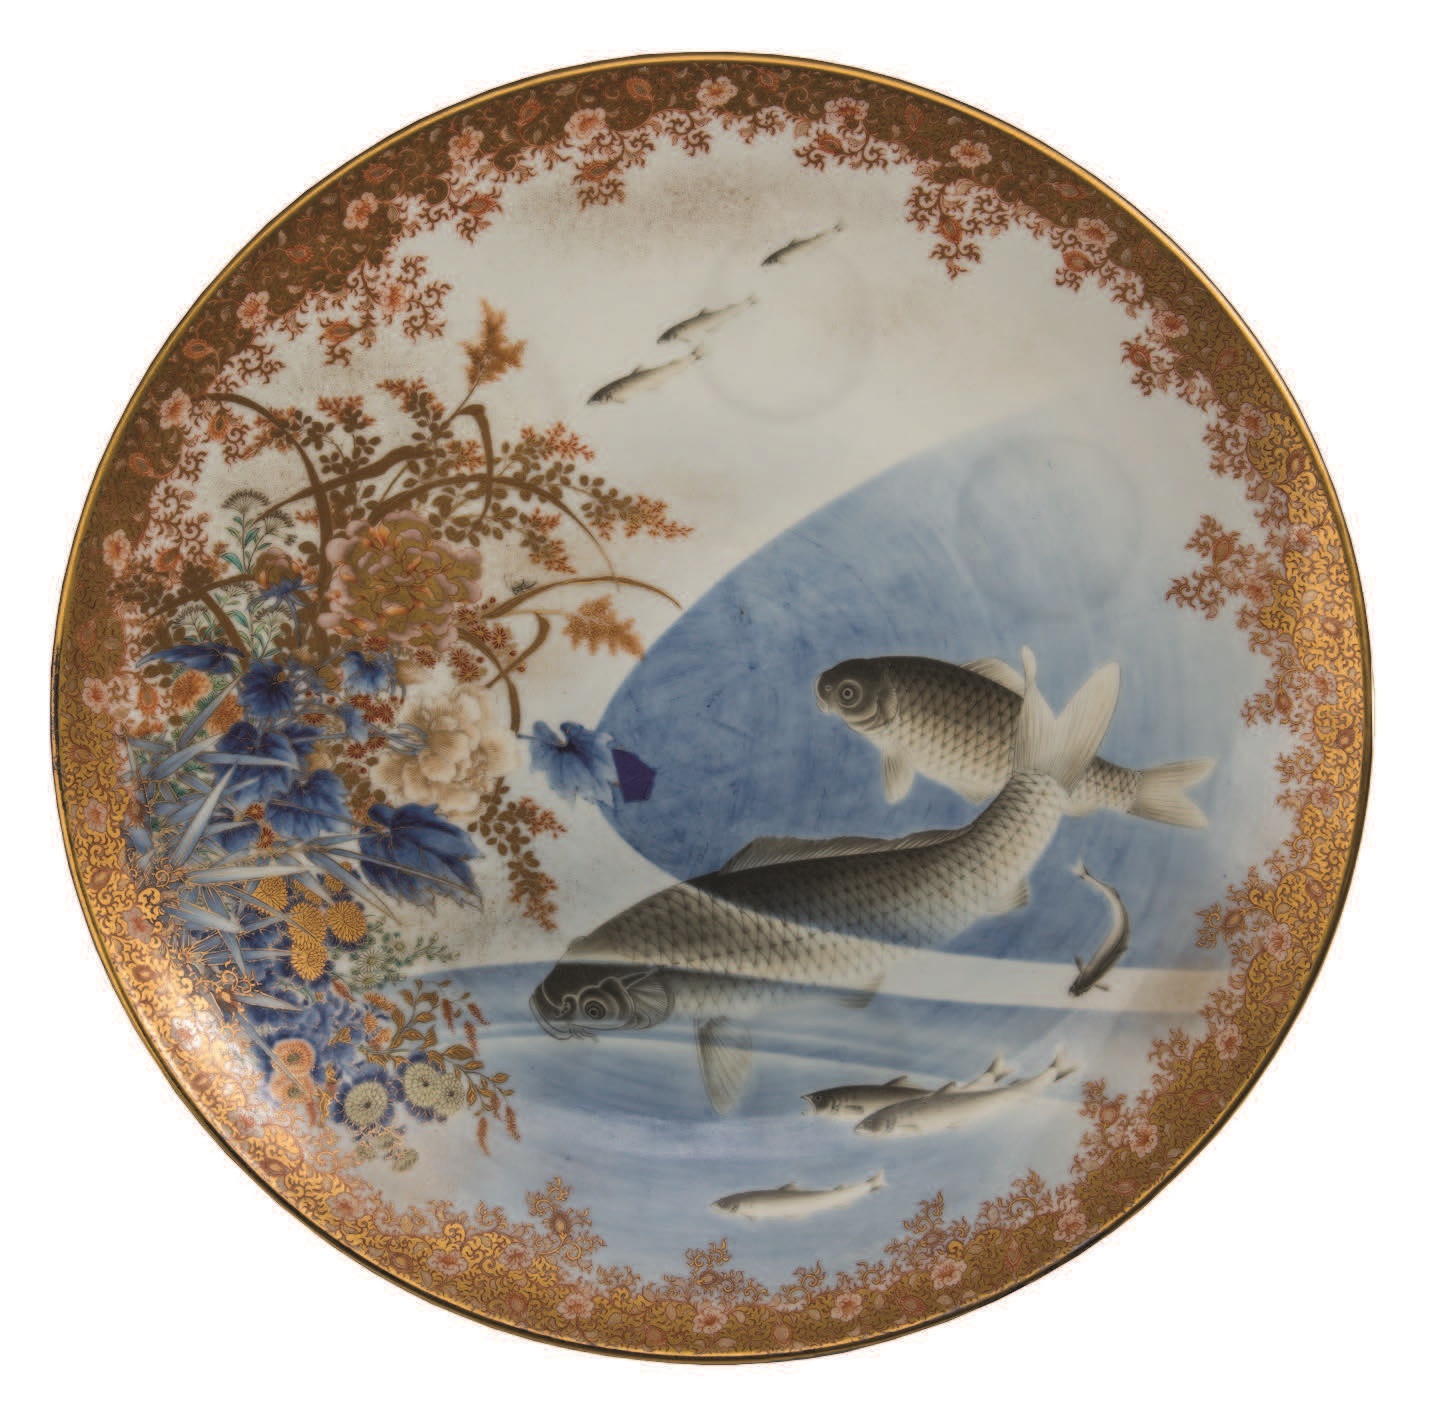 An ornate round dish with two large fish against a blue and white background. Around the edge is a gold floral design.